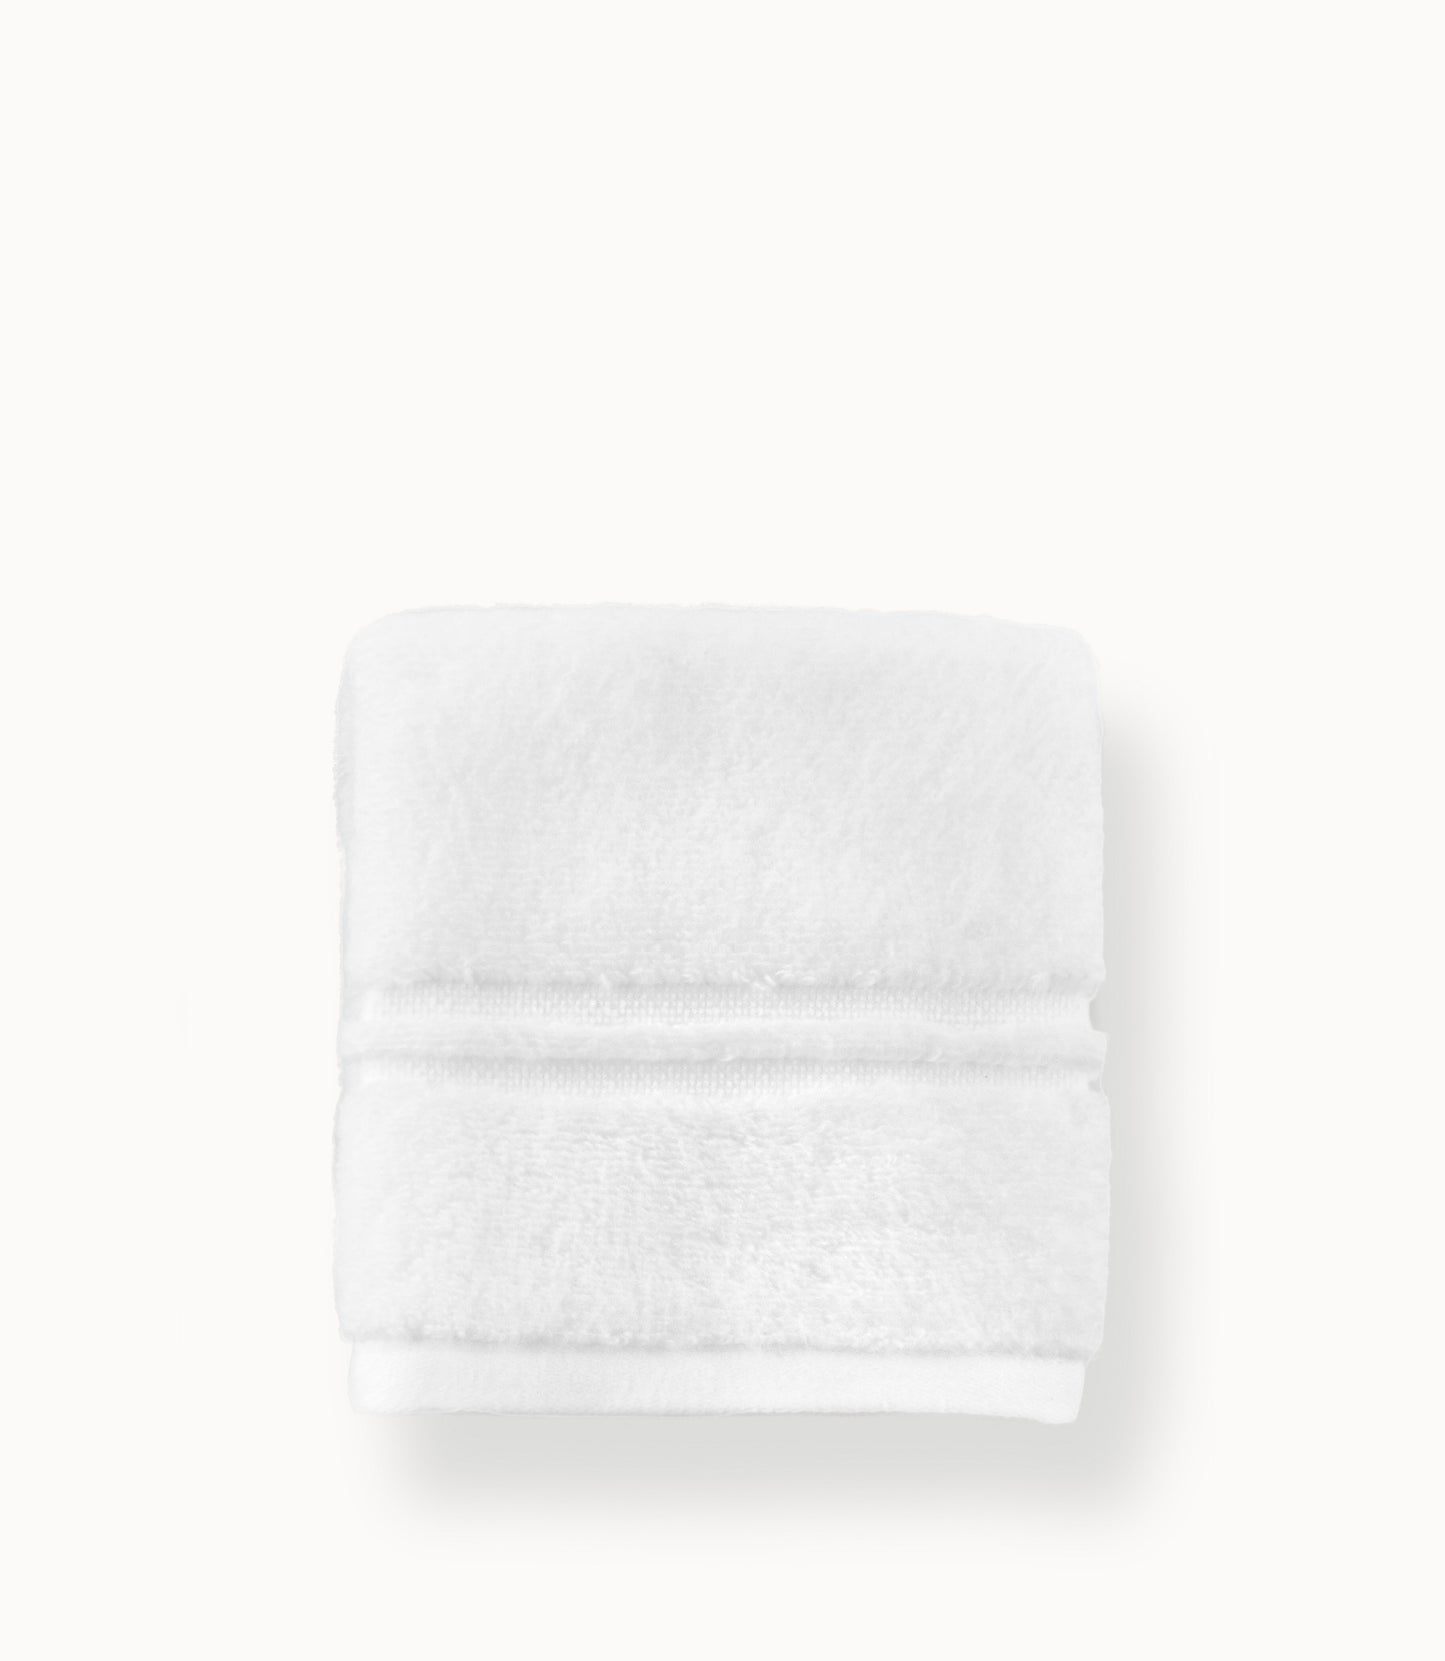 Peacock Alley Hudson Stripe Ribbed Cotton Towels